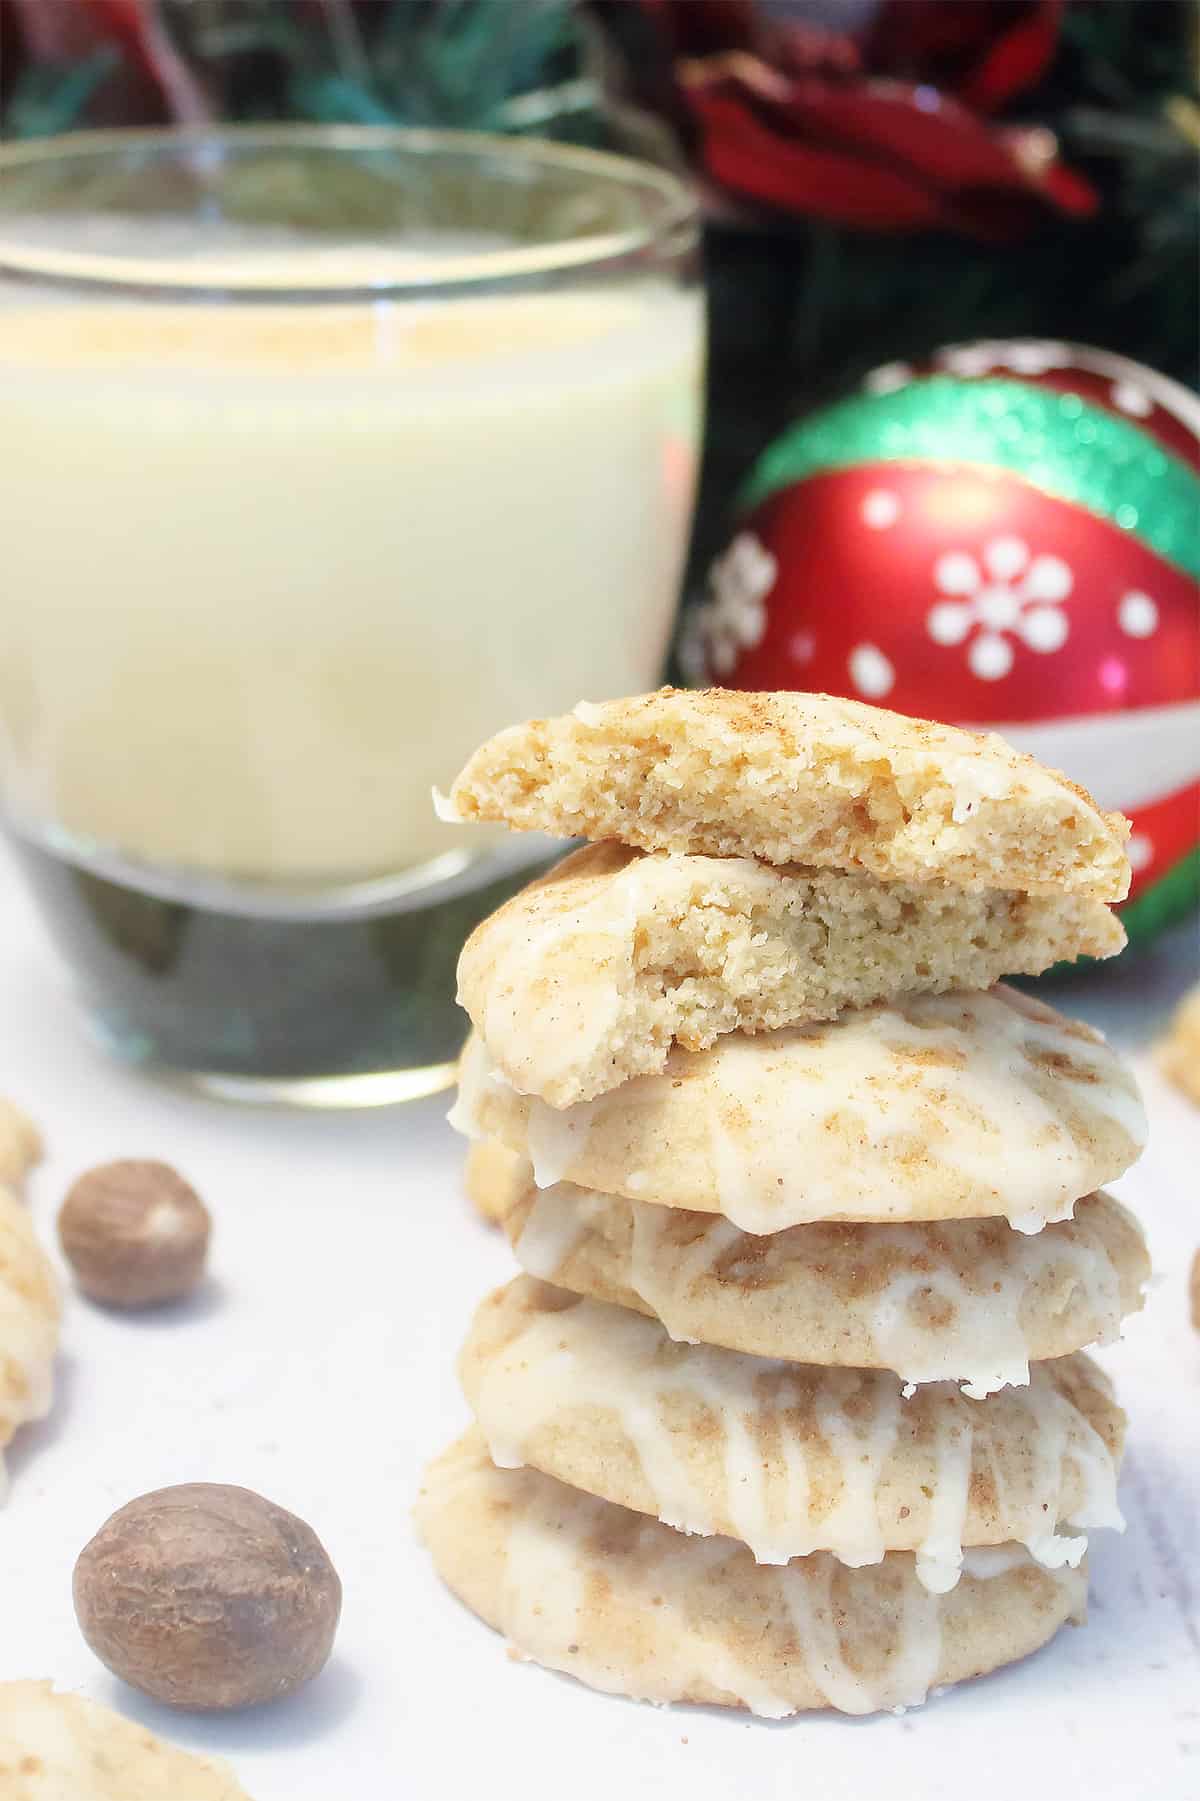 Stack of eggnog cookies with eggnog icing by glass of eggnog.